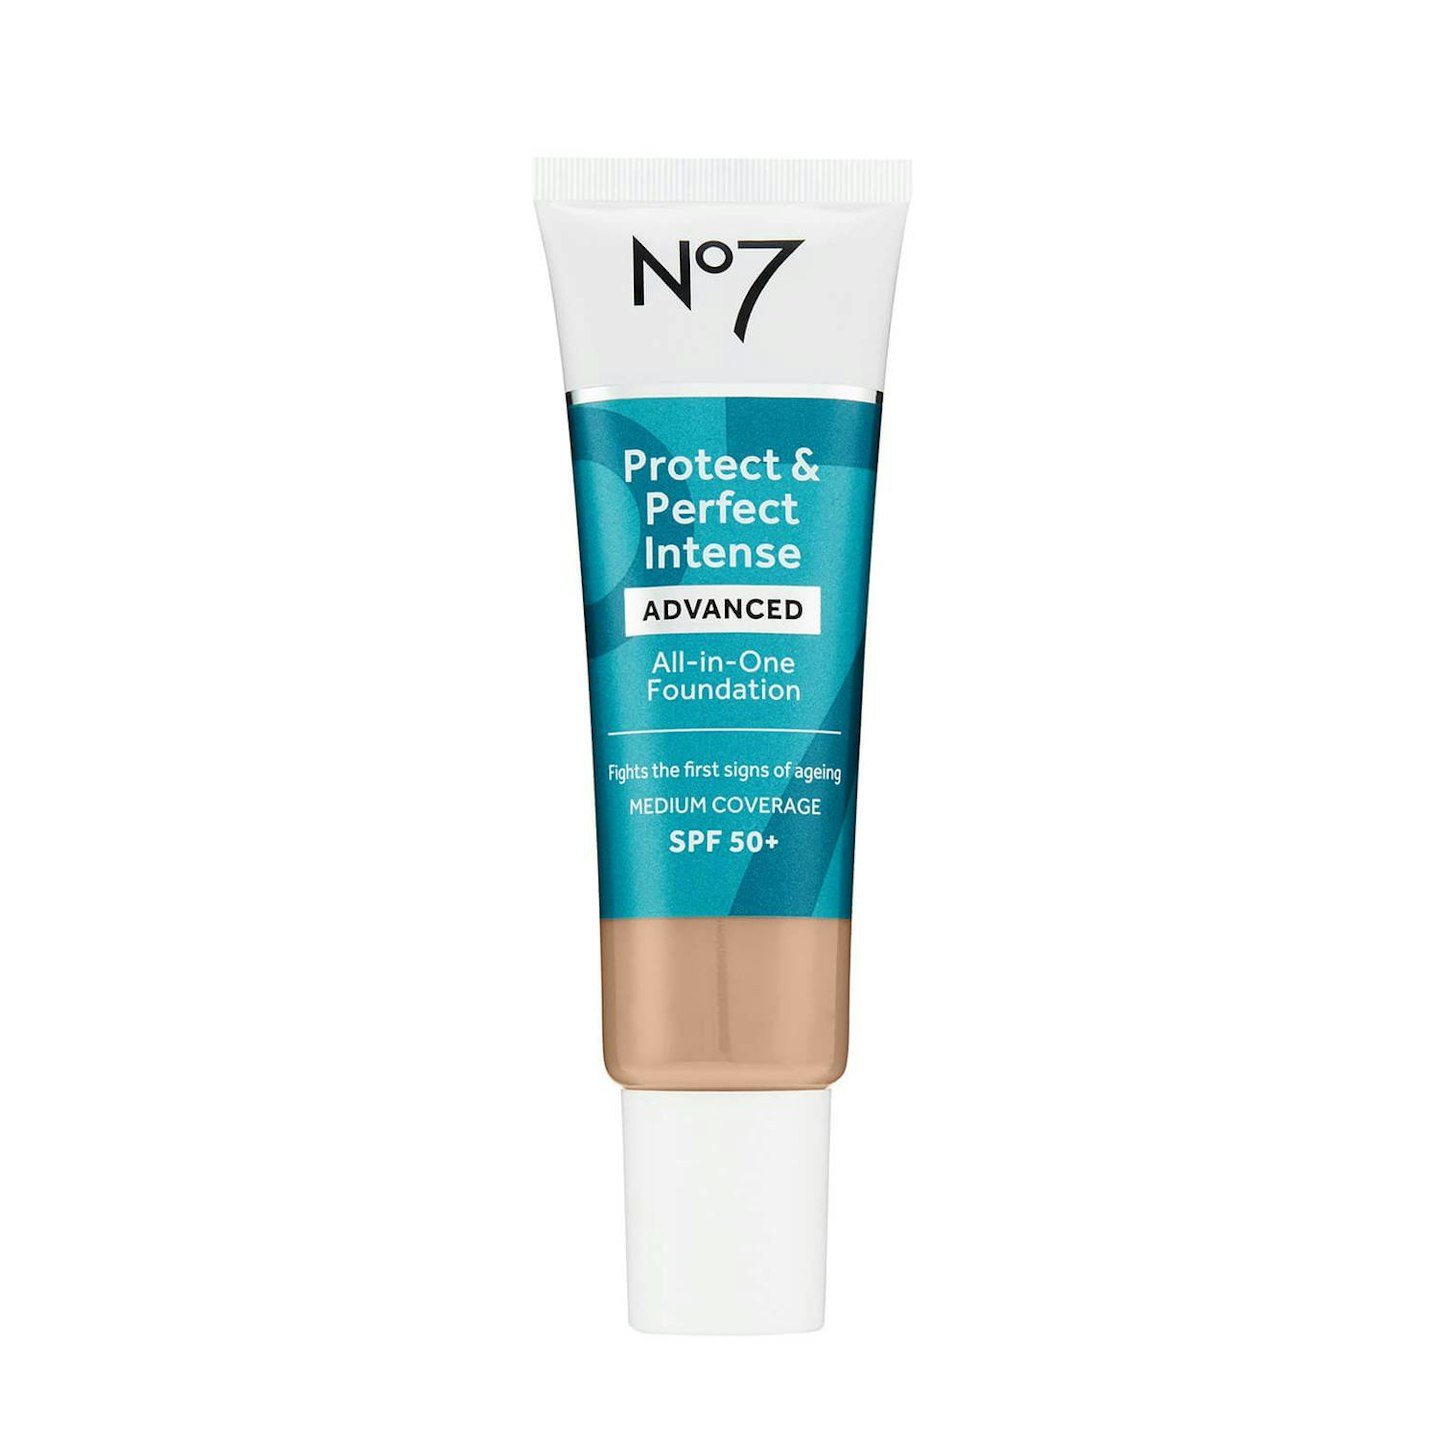 No7 Protect & Perfect Advanced All In One Foundation, £17.50